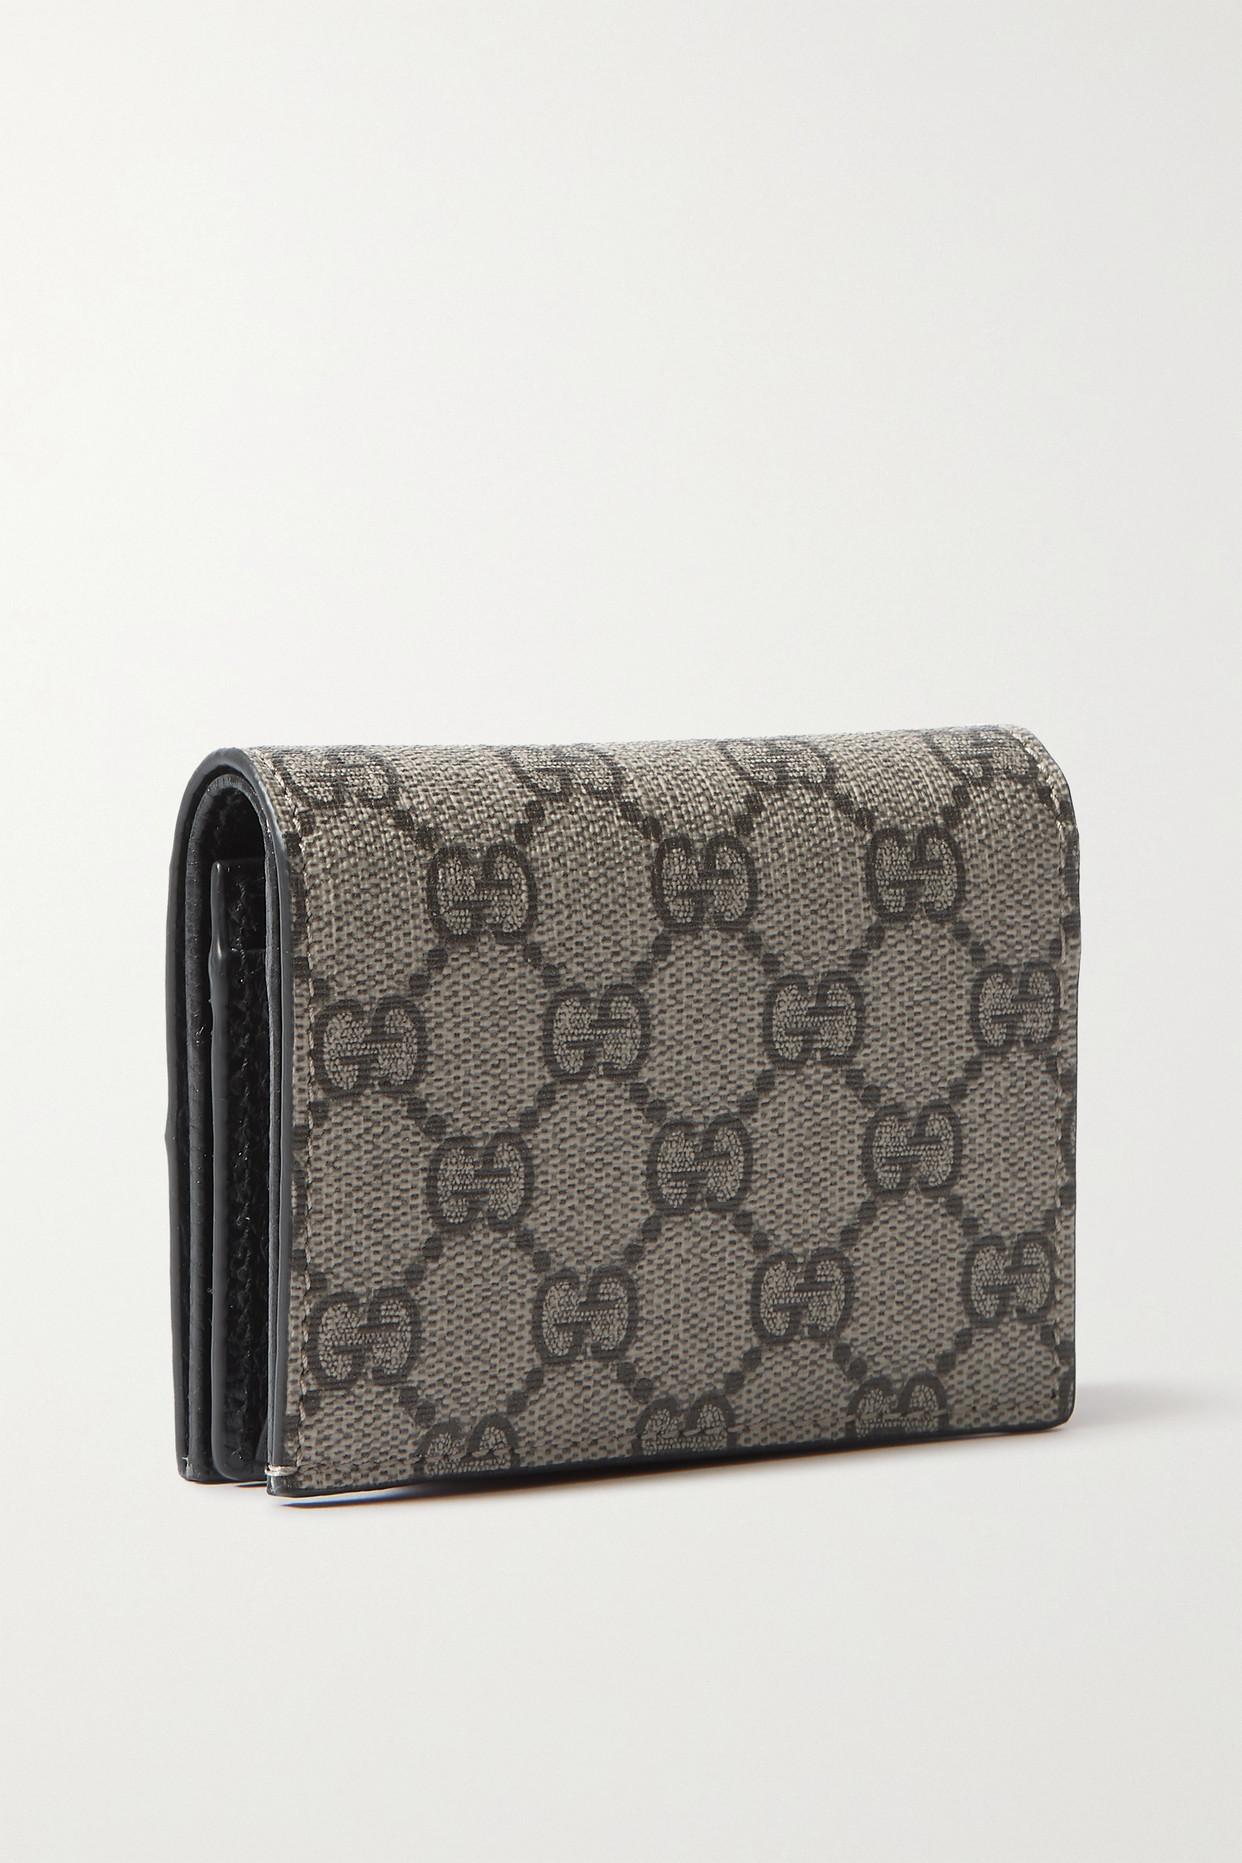 Gucci Gg Marmont Petite Textured-leather And Printed Coated-canvas 